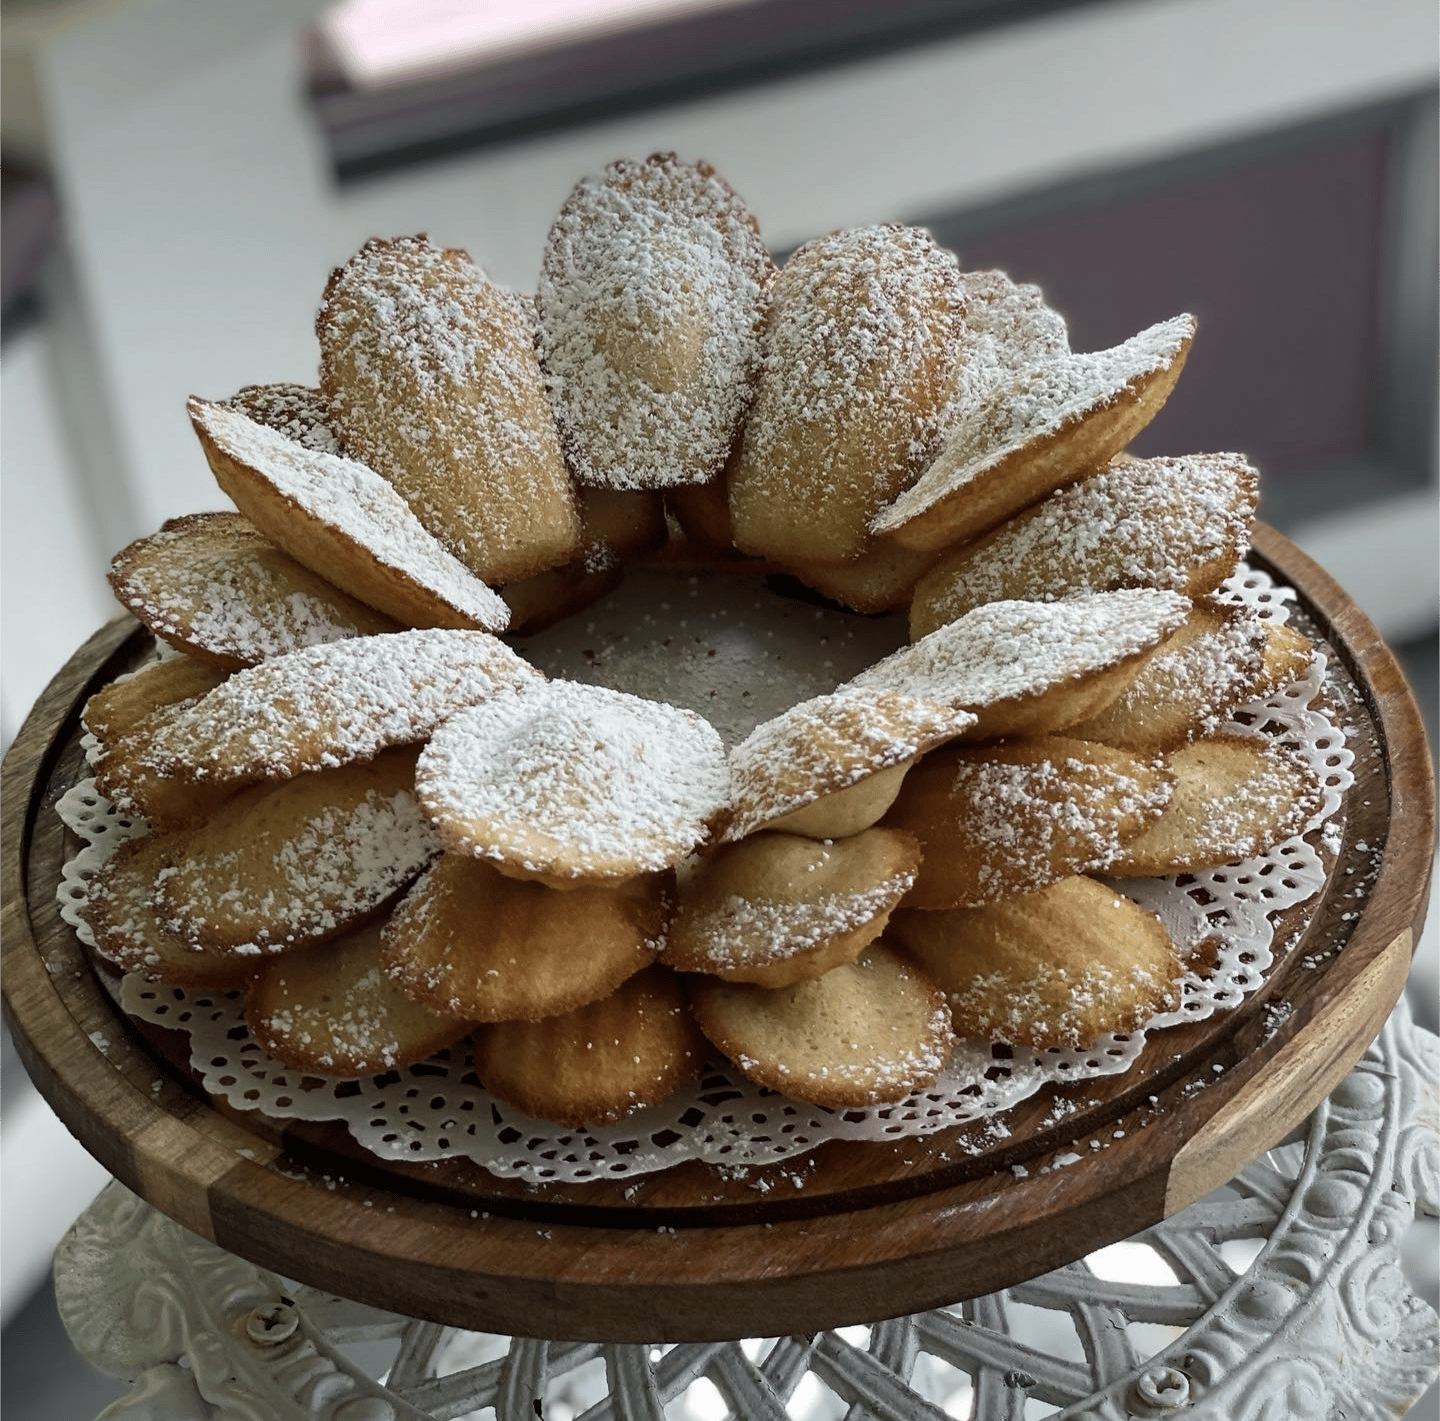 a plate of madeline cookies covered in powdered sugar